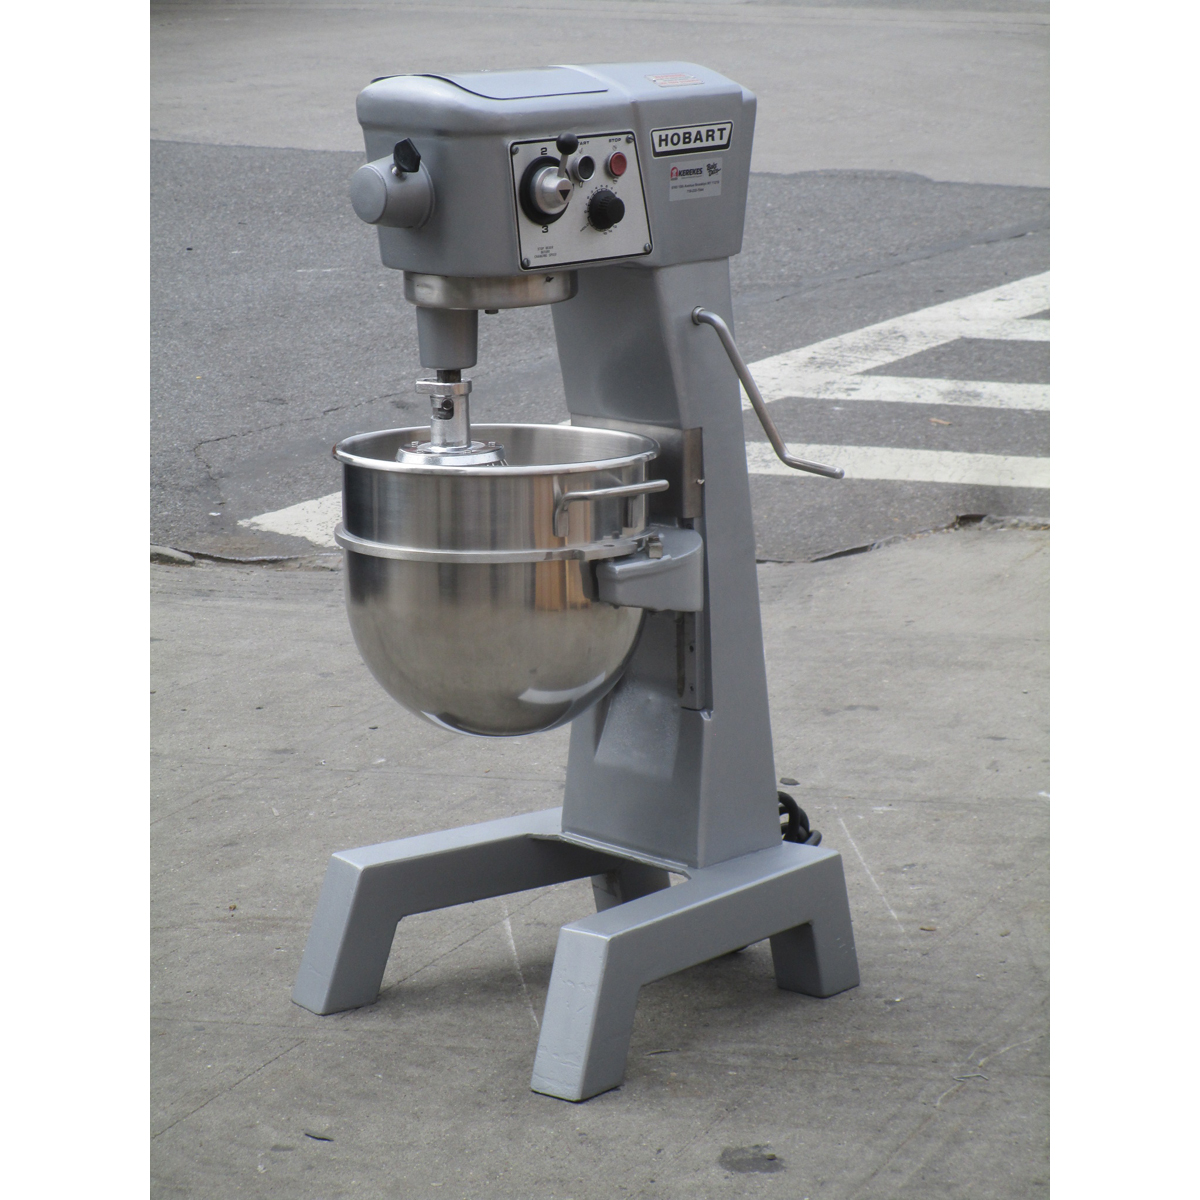 Hobart 30 Quart D300T Mixer With Timer, Used Excellent Condition